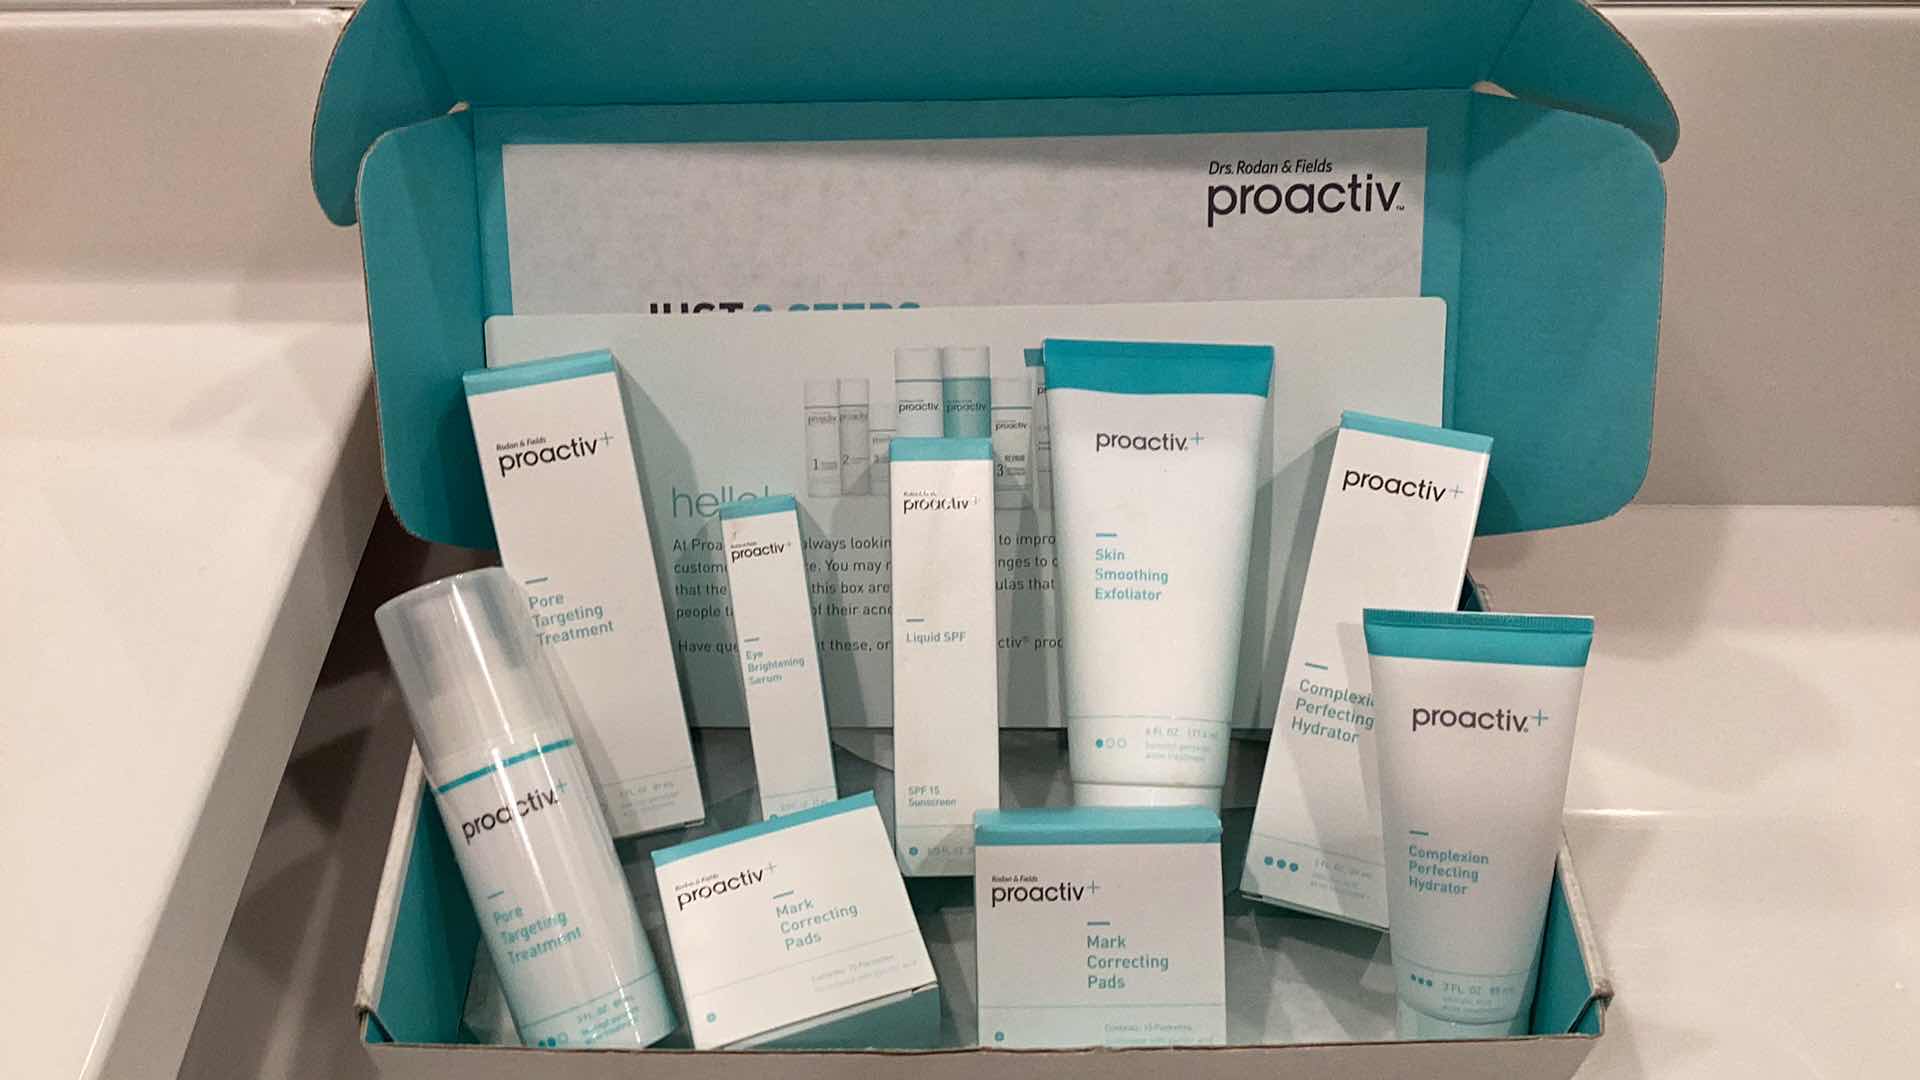 Photo 2 of PROACTIVE EXPIRED BUT FACTORY SEALED INCLUDES COMPLEXION PERFECTING HYDRATOR, SKIN SMOOTHING EXFOLIATOR, MARK CORRECTING PADS, AND OTHER SKIN ESSENTIALS FOR EVERYDAY ROUTINE. - 